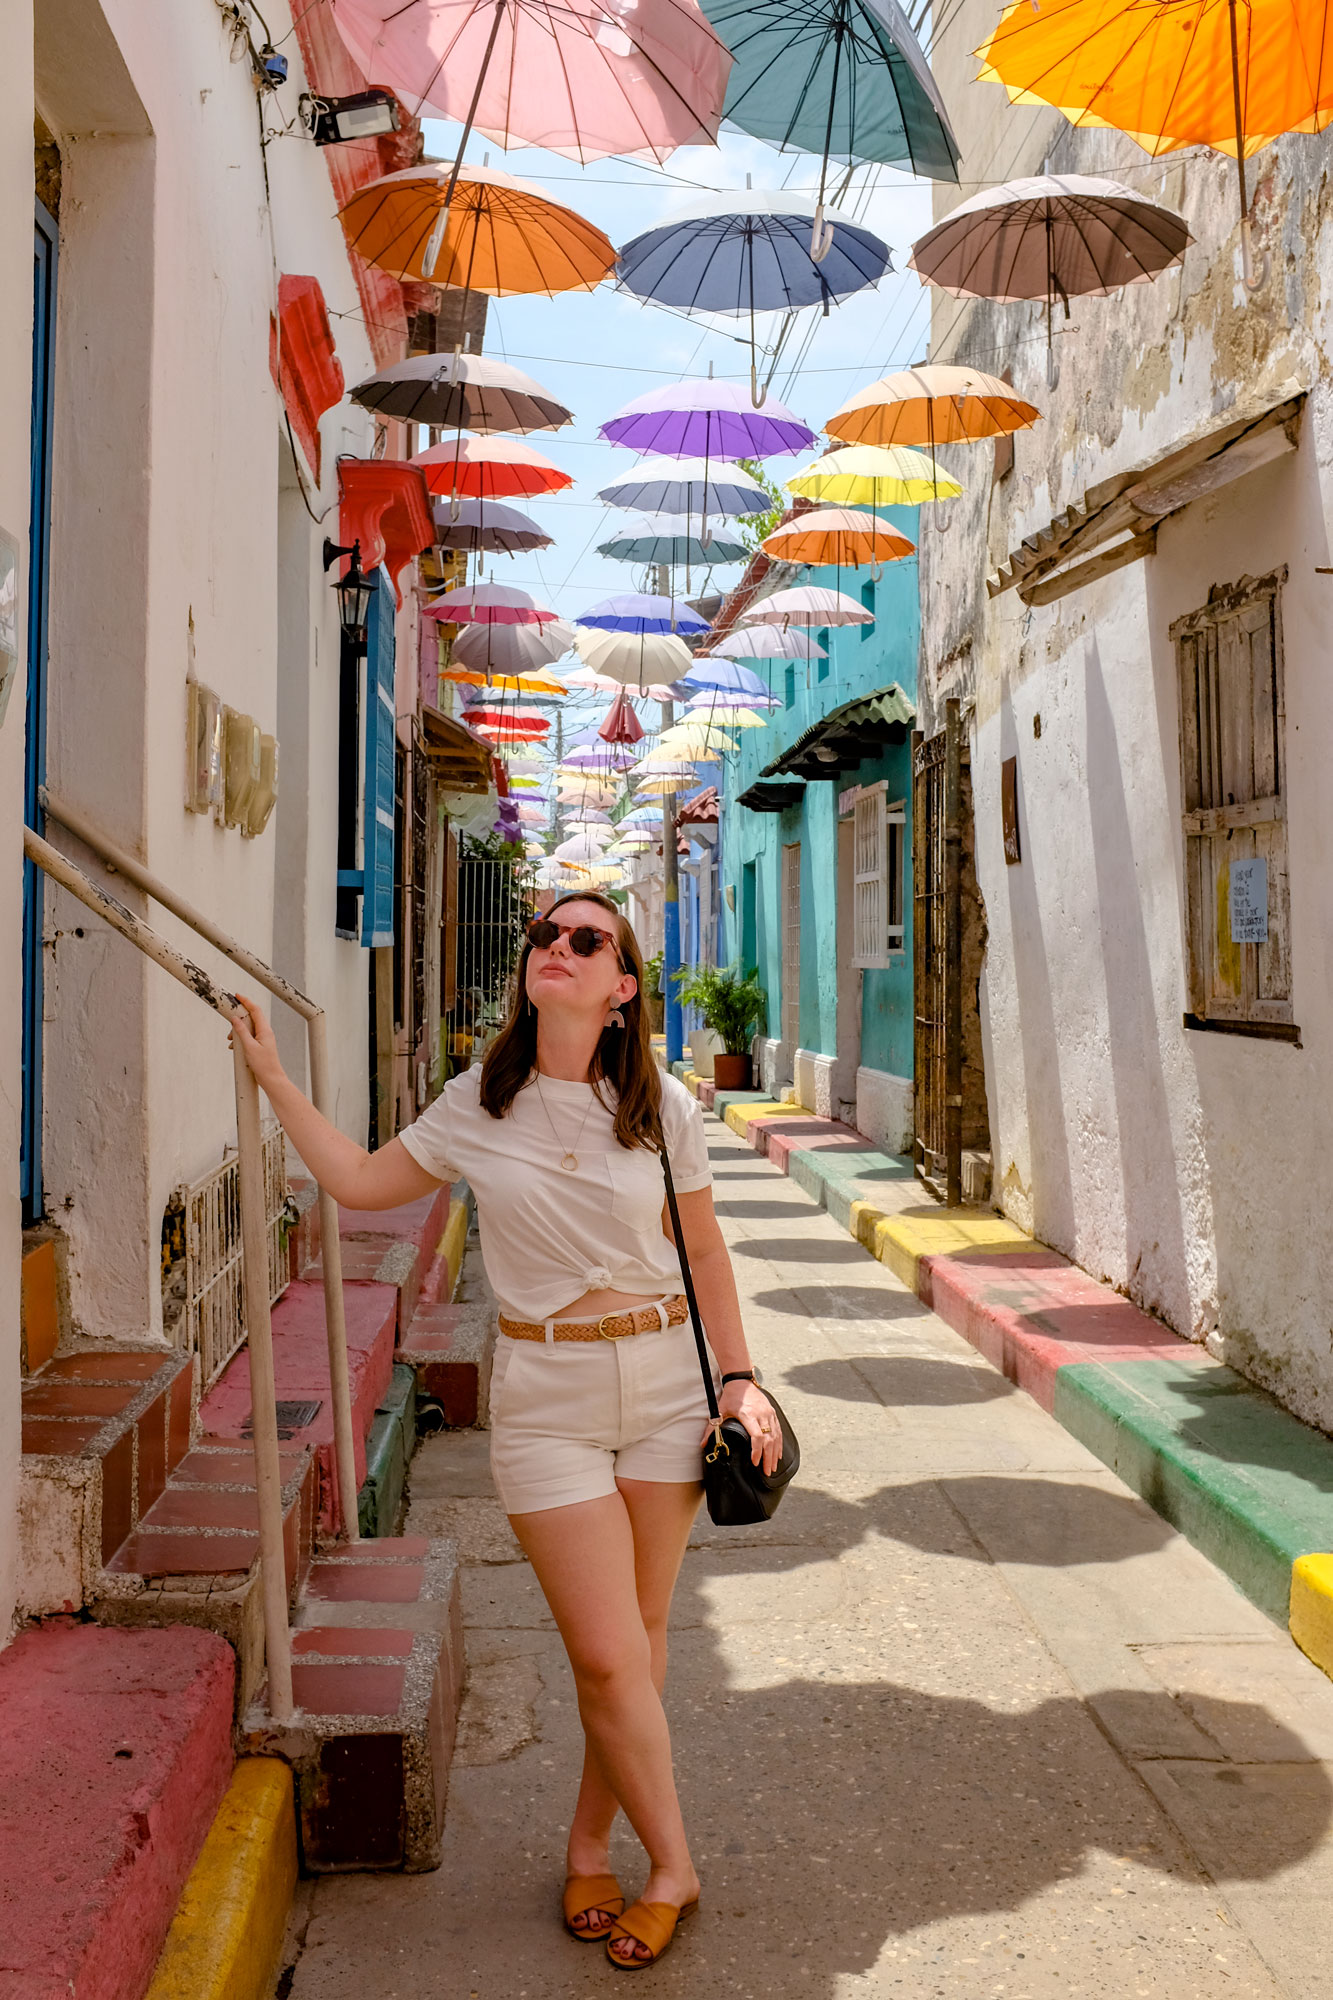 Krystal standing under the colorful umbrellas on a street in Getsemani. She is wearing a white tee, white shorts, purse, belt and glasses